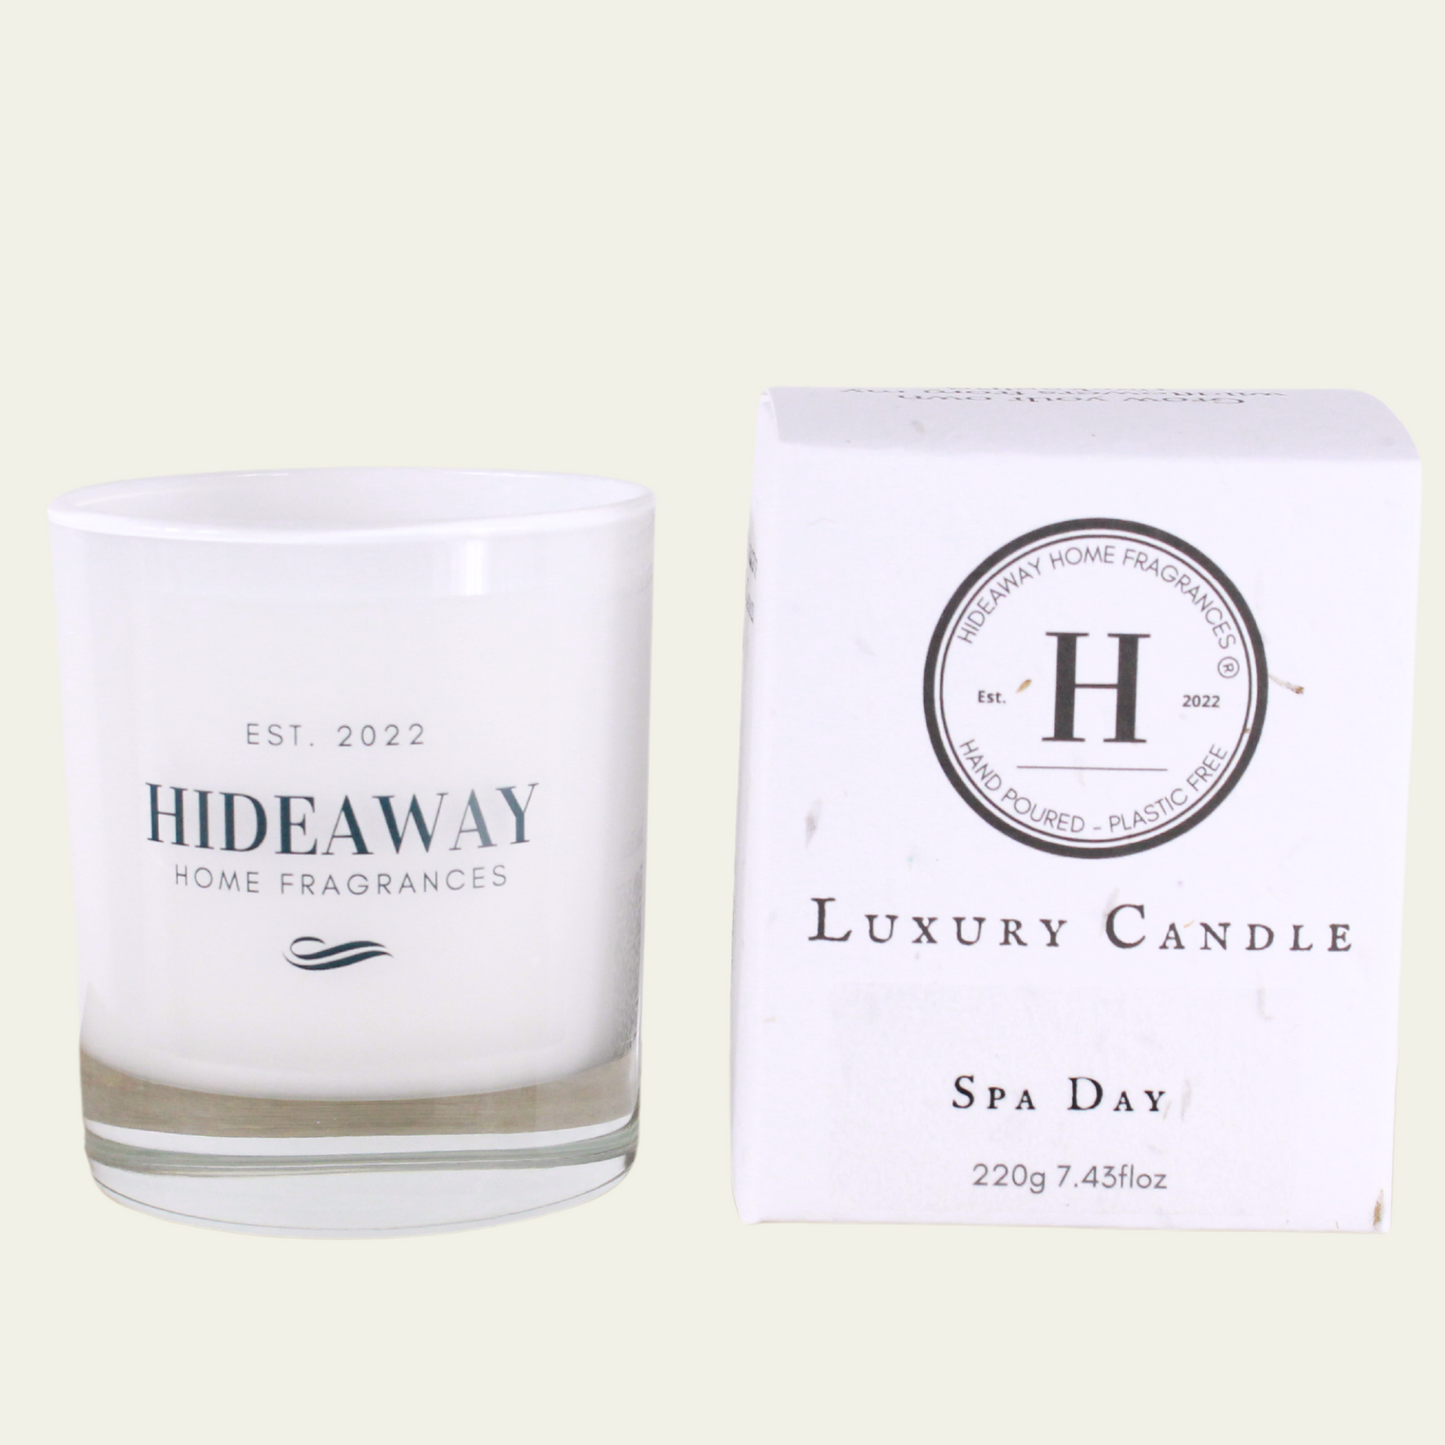 Spa Day Luxury Candle - Hideaway Home Fragrances